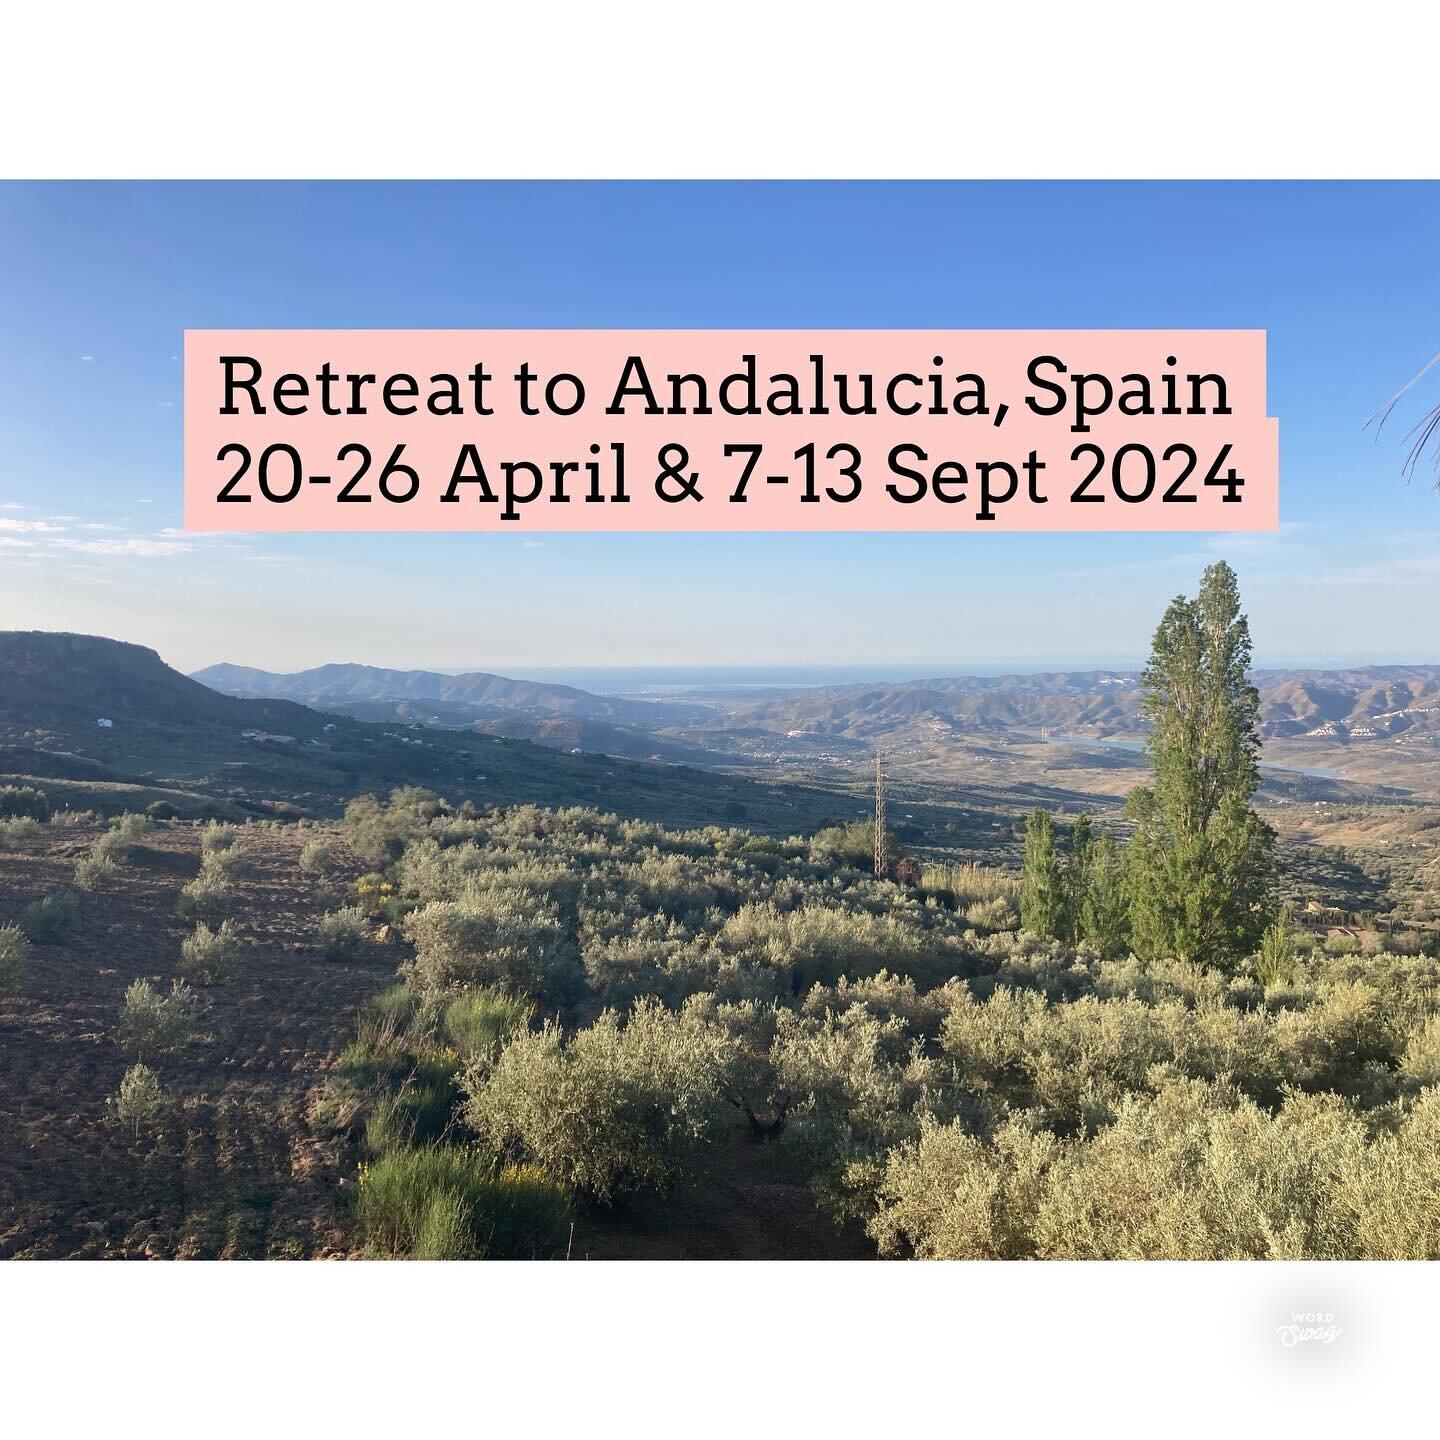 RETREAT TO ANDALUCIA, SPAIN
20-26 April &amp; 7-13 September 2024
&bull;
Looking for a holiday that will leave you feeling energised, invigorated, calm, grounded, inspired, connected, nurtured, liberated, present, and more alive? 
&bull;
Join me for 